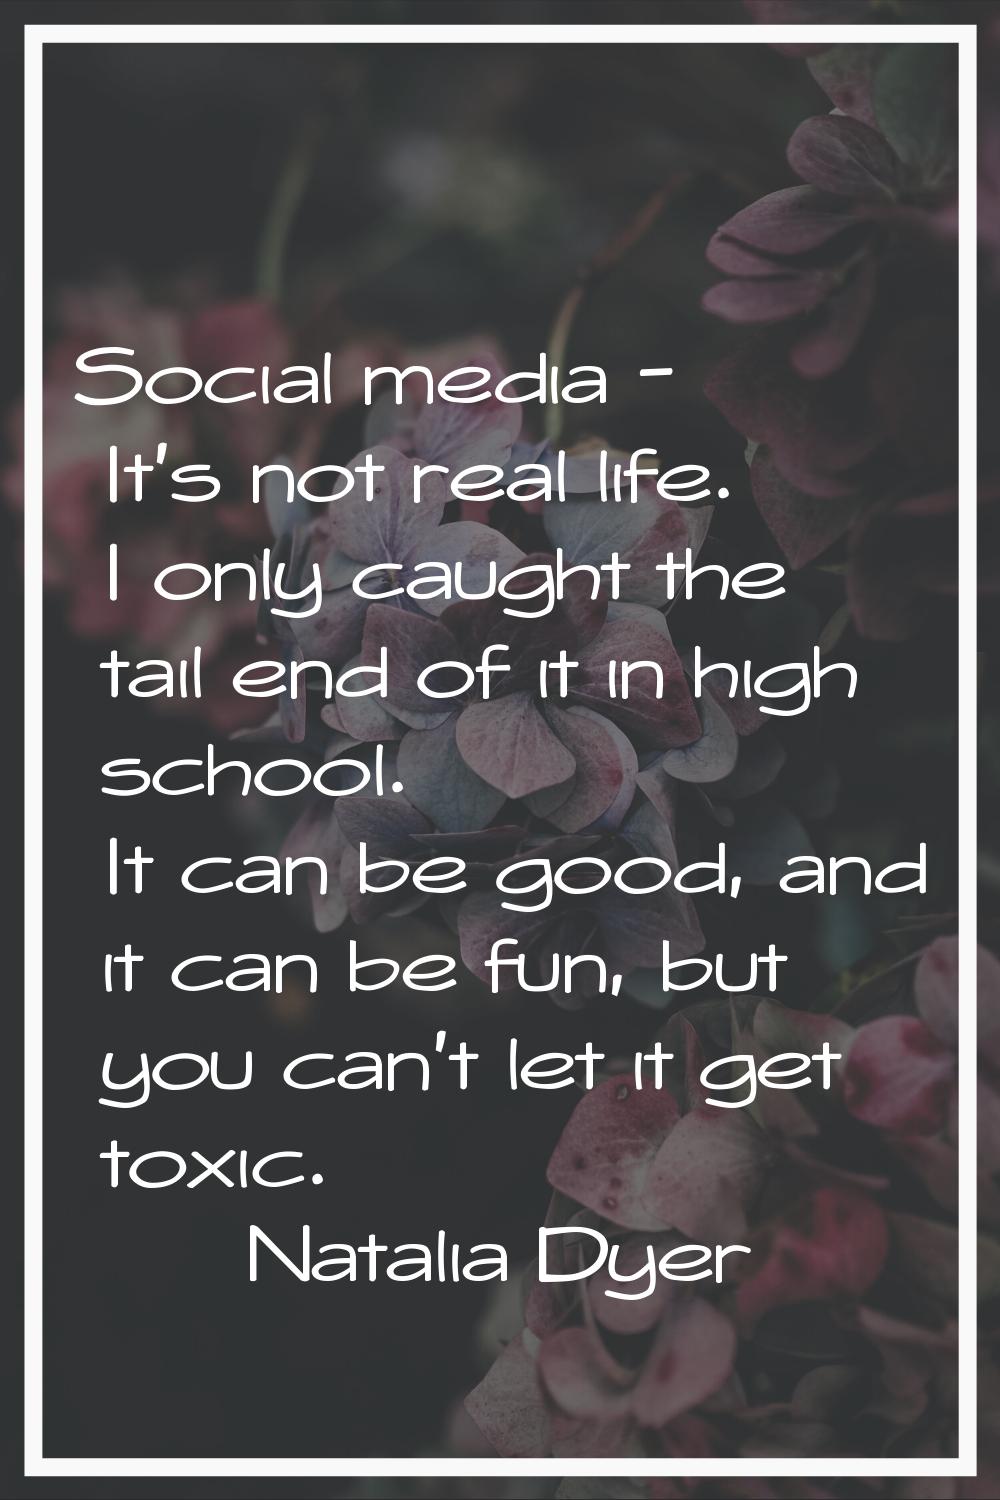 Social media - It's not real life. I only caught the tail end of it in high school. It can be good,